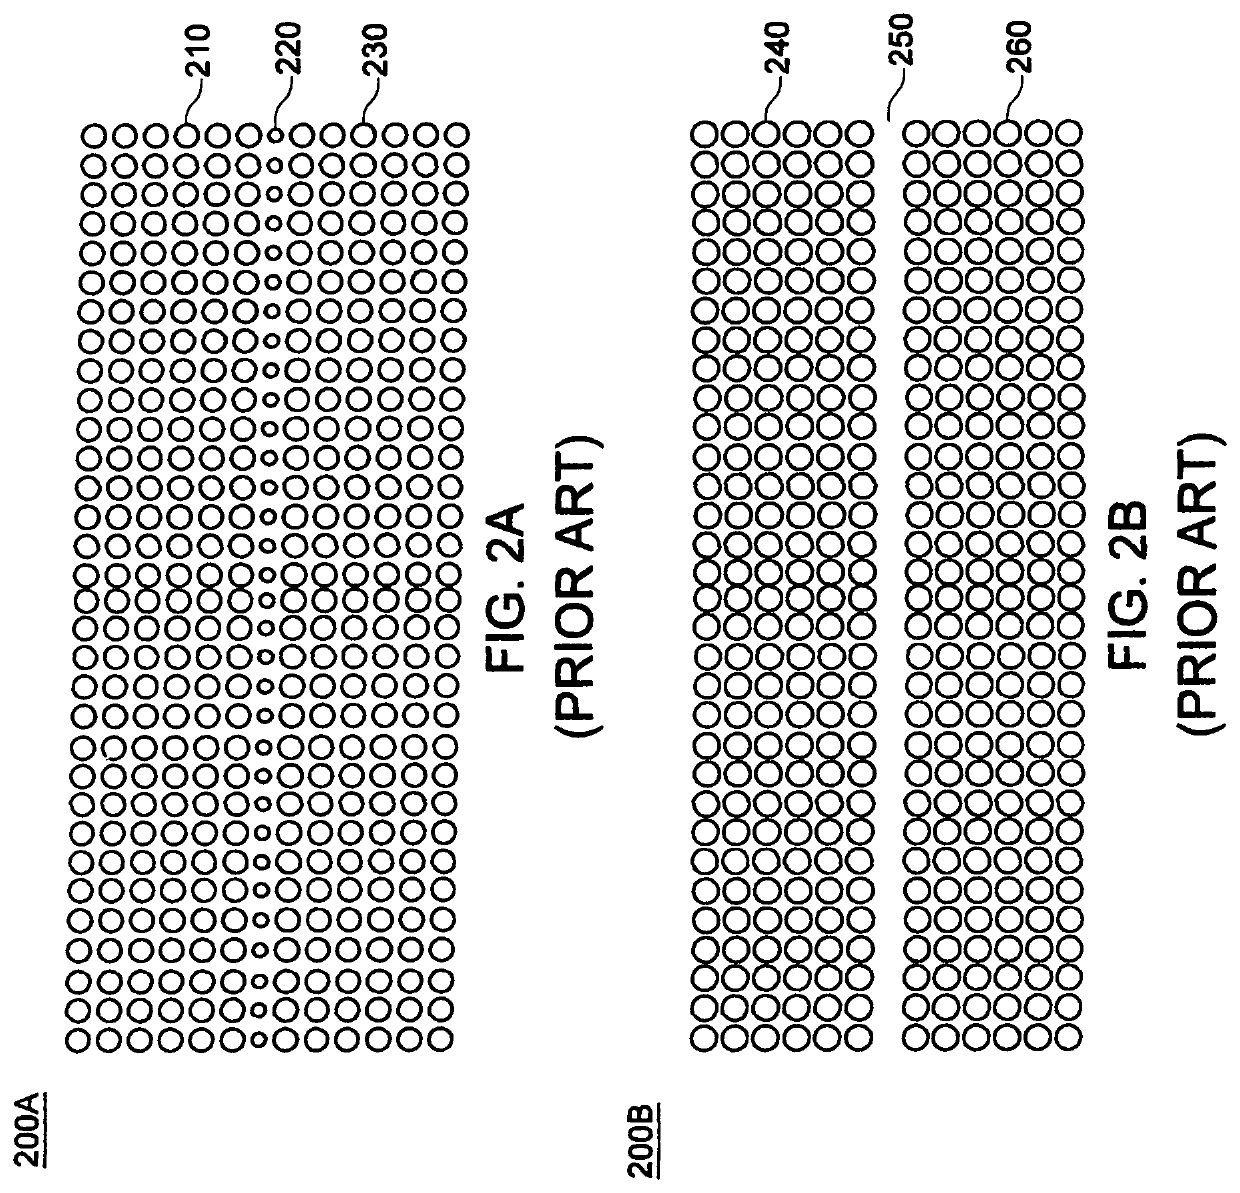 Integrated thermal sensor comprising a photonic crystal waveguide